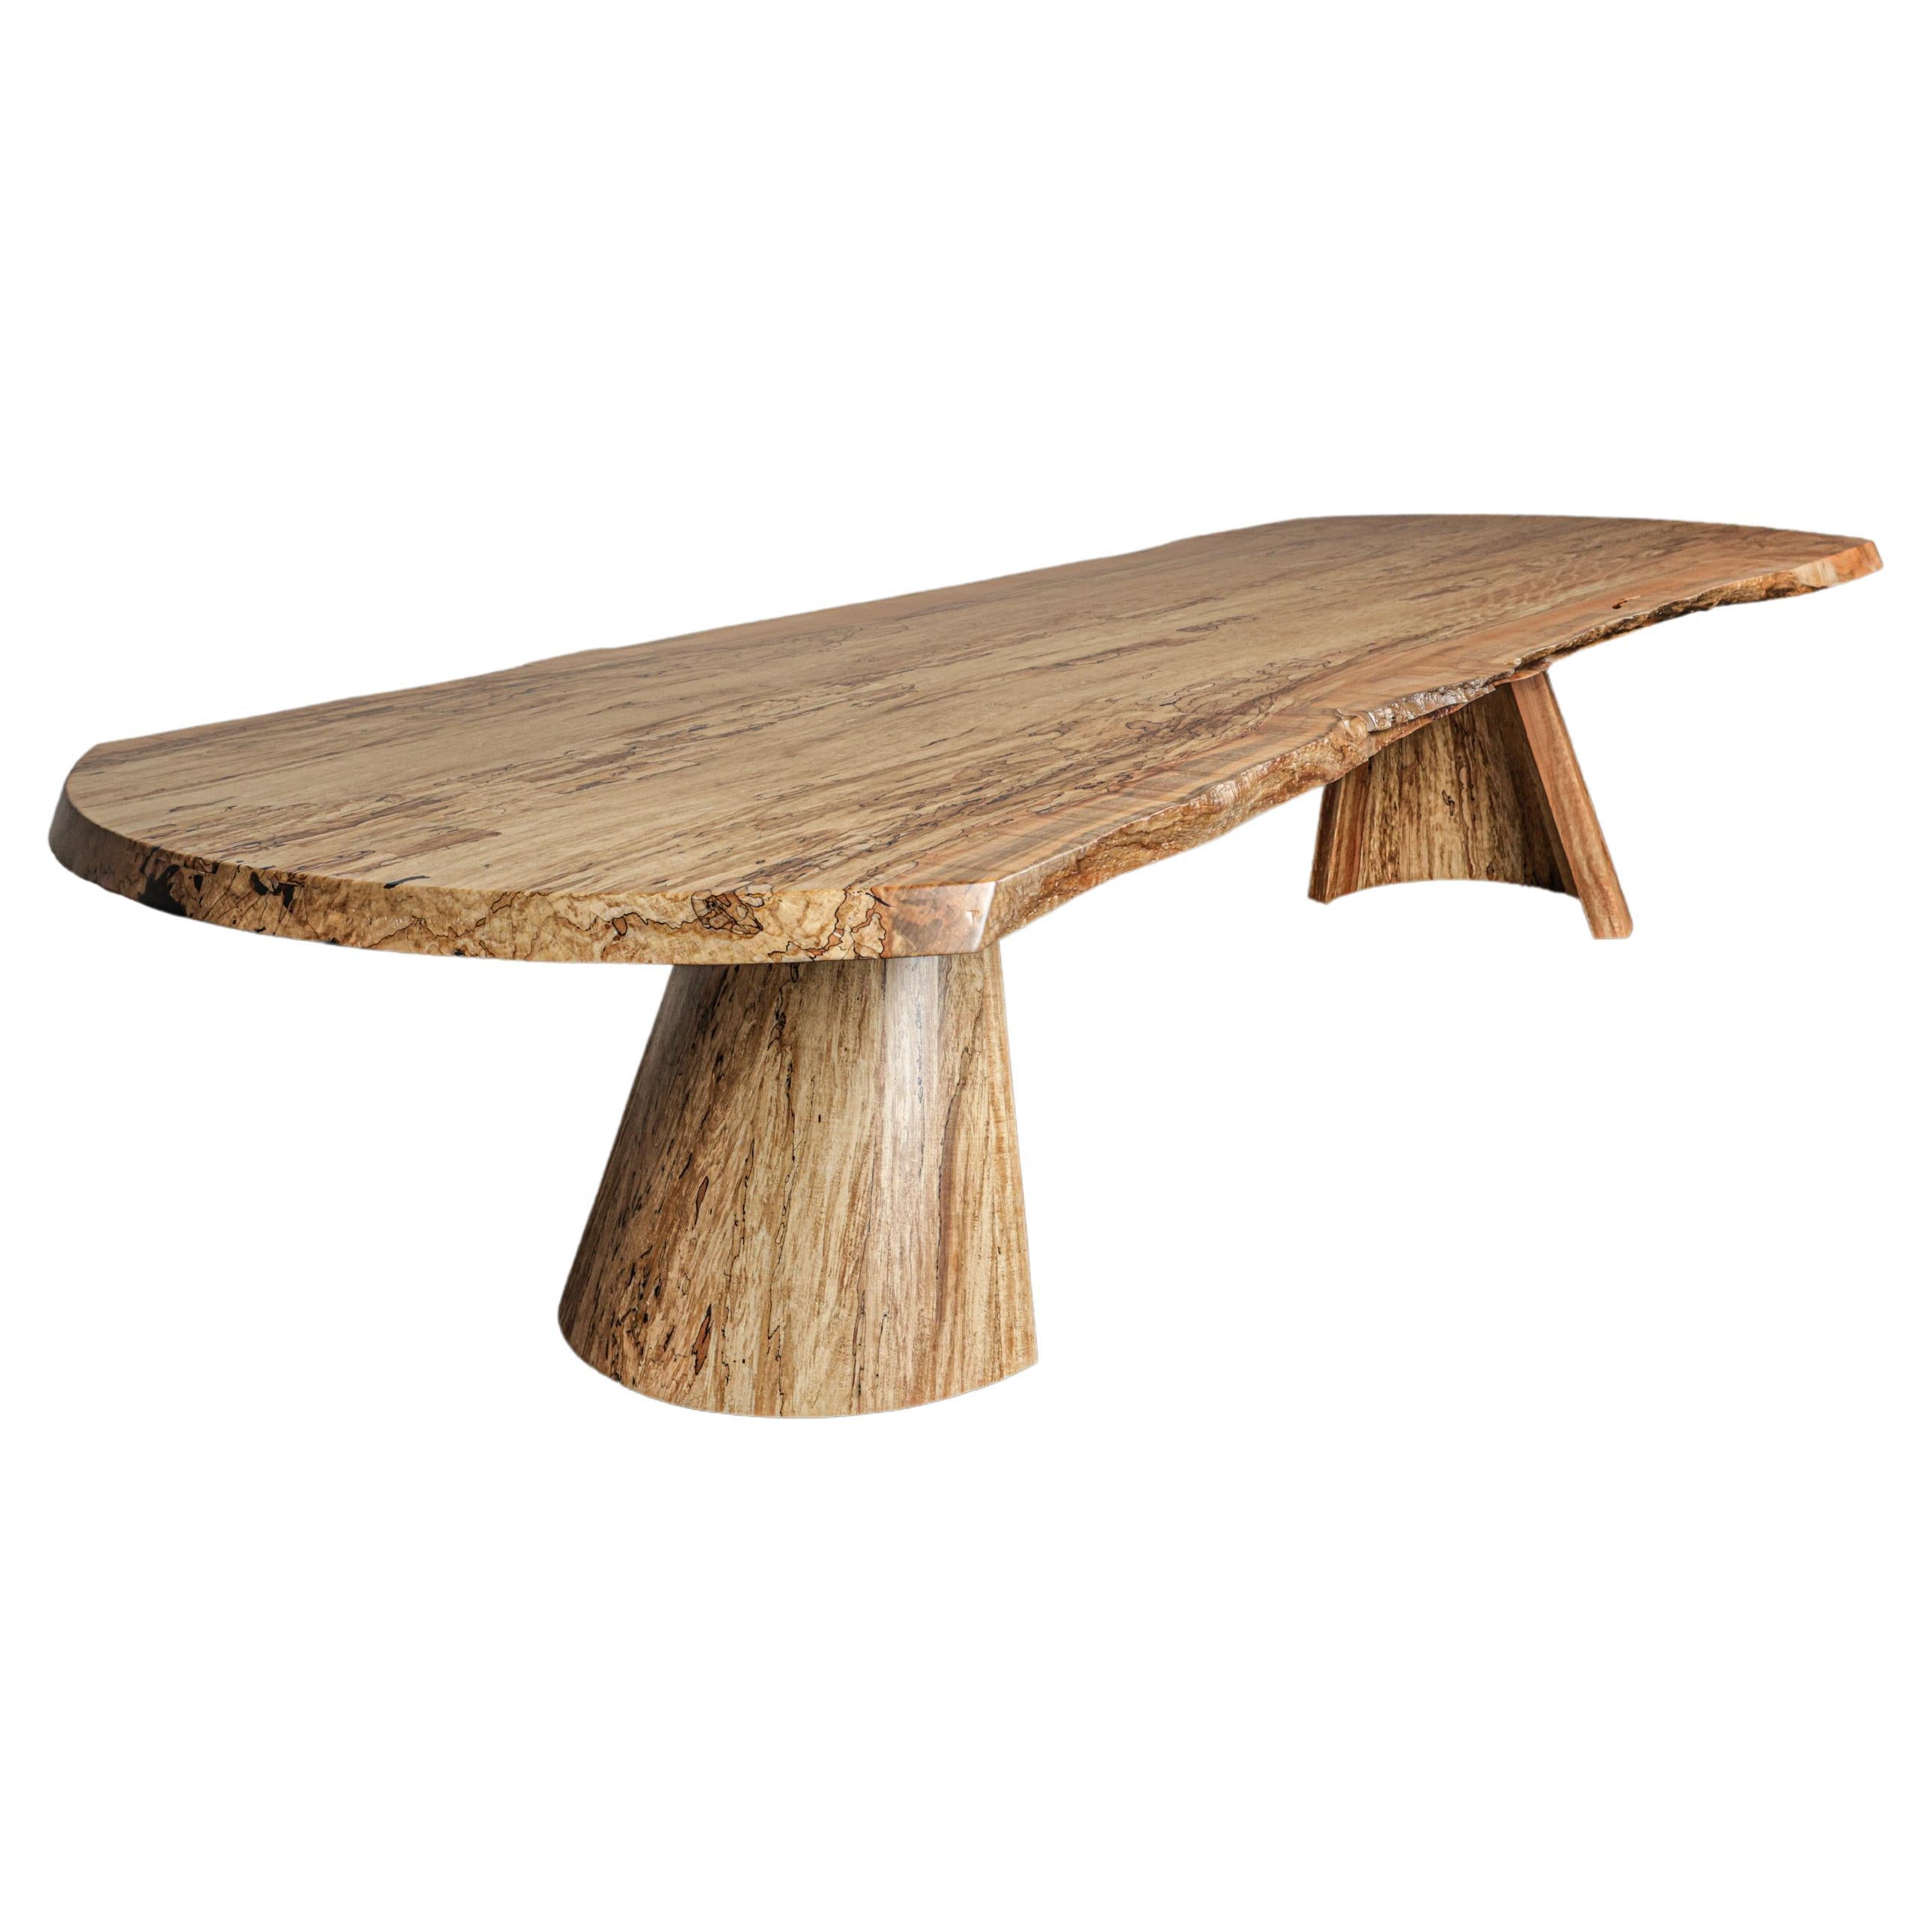 In Stock - Solid Spalted Maple Dining Table - 12 Ft - Cove Base